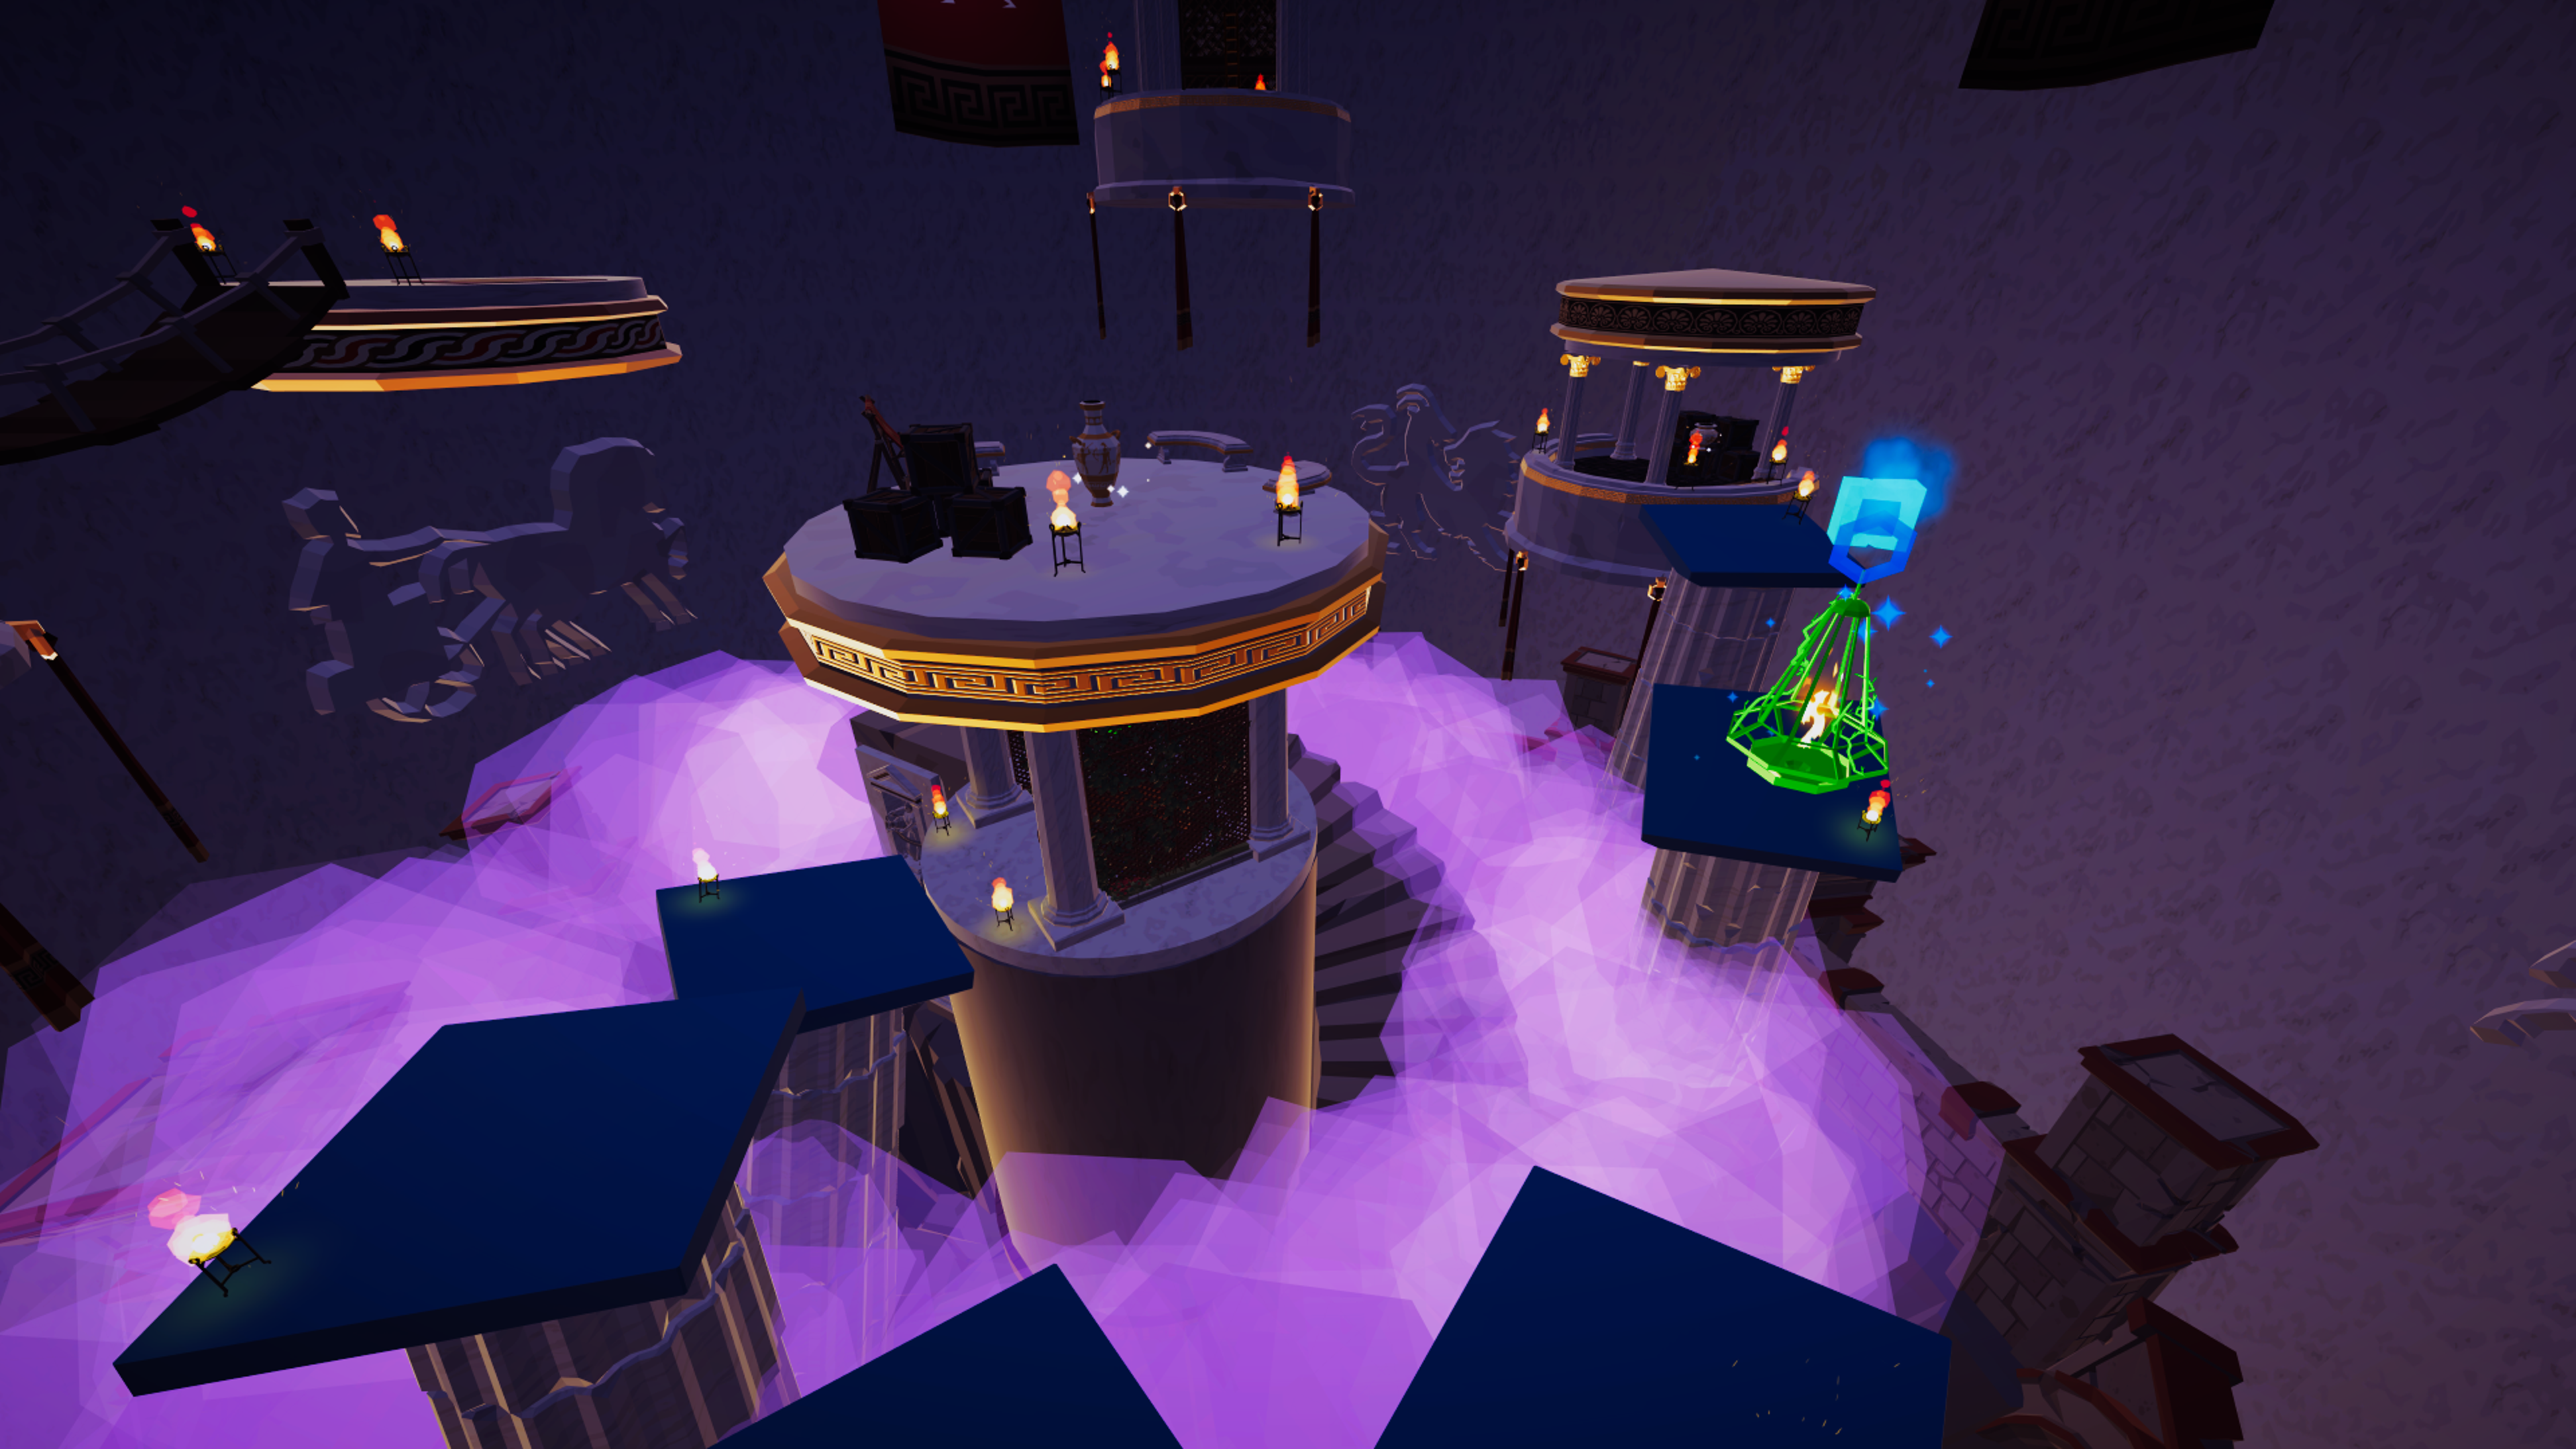 Elevated platforms adorned with torches hover over a mystic landscape in this game level.